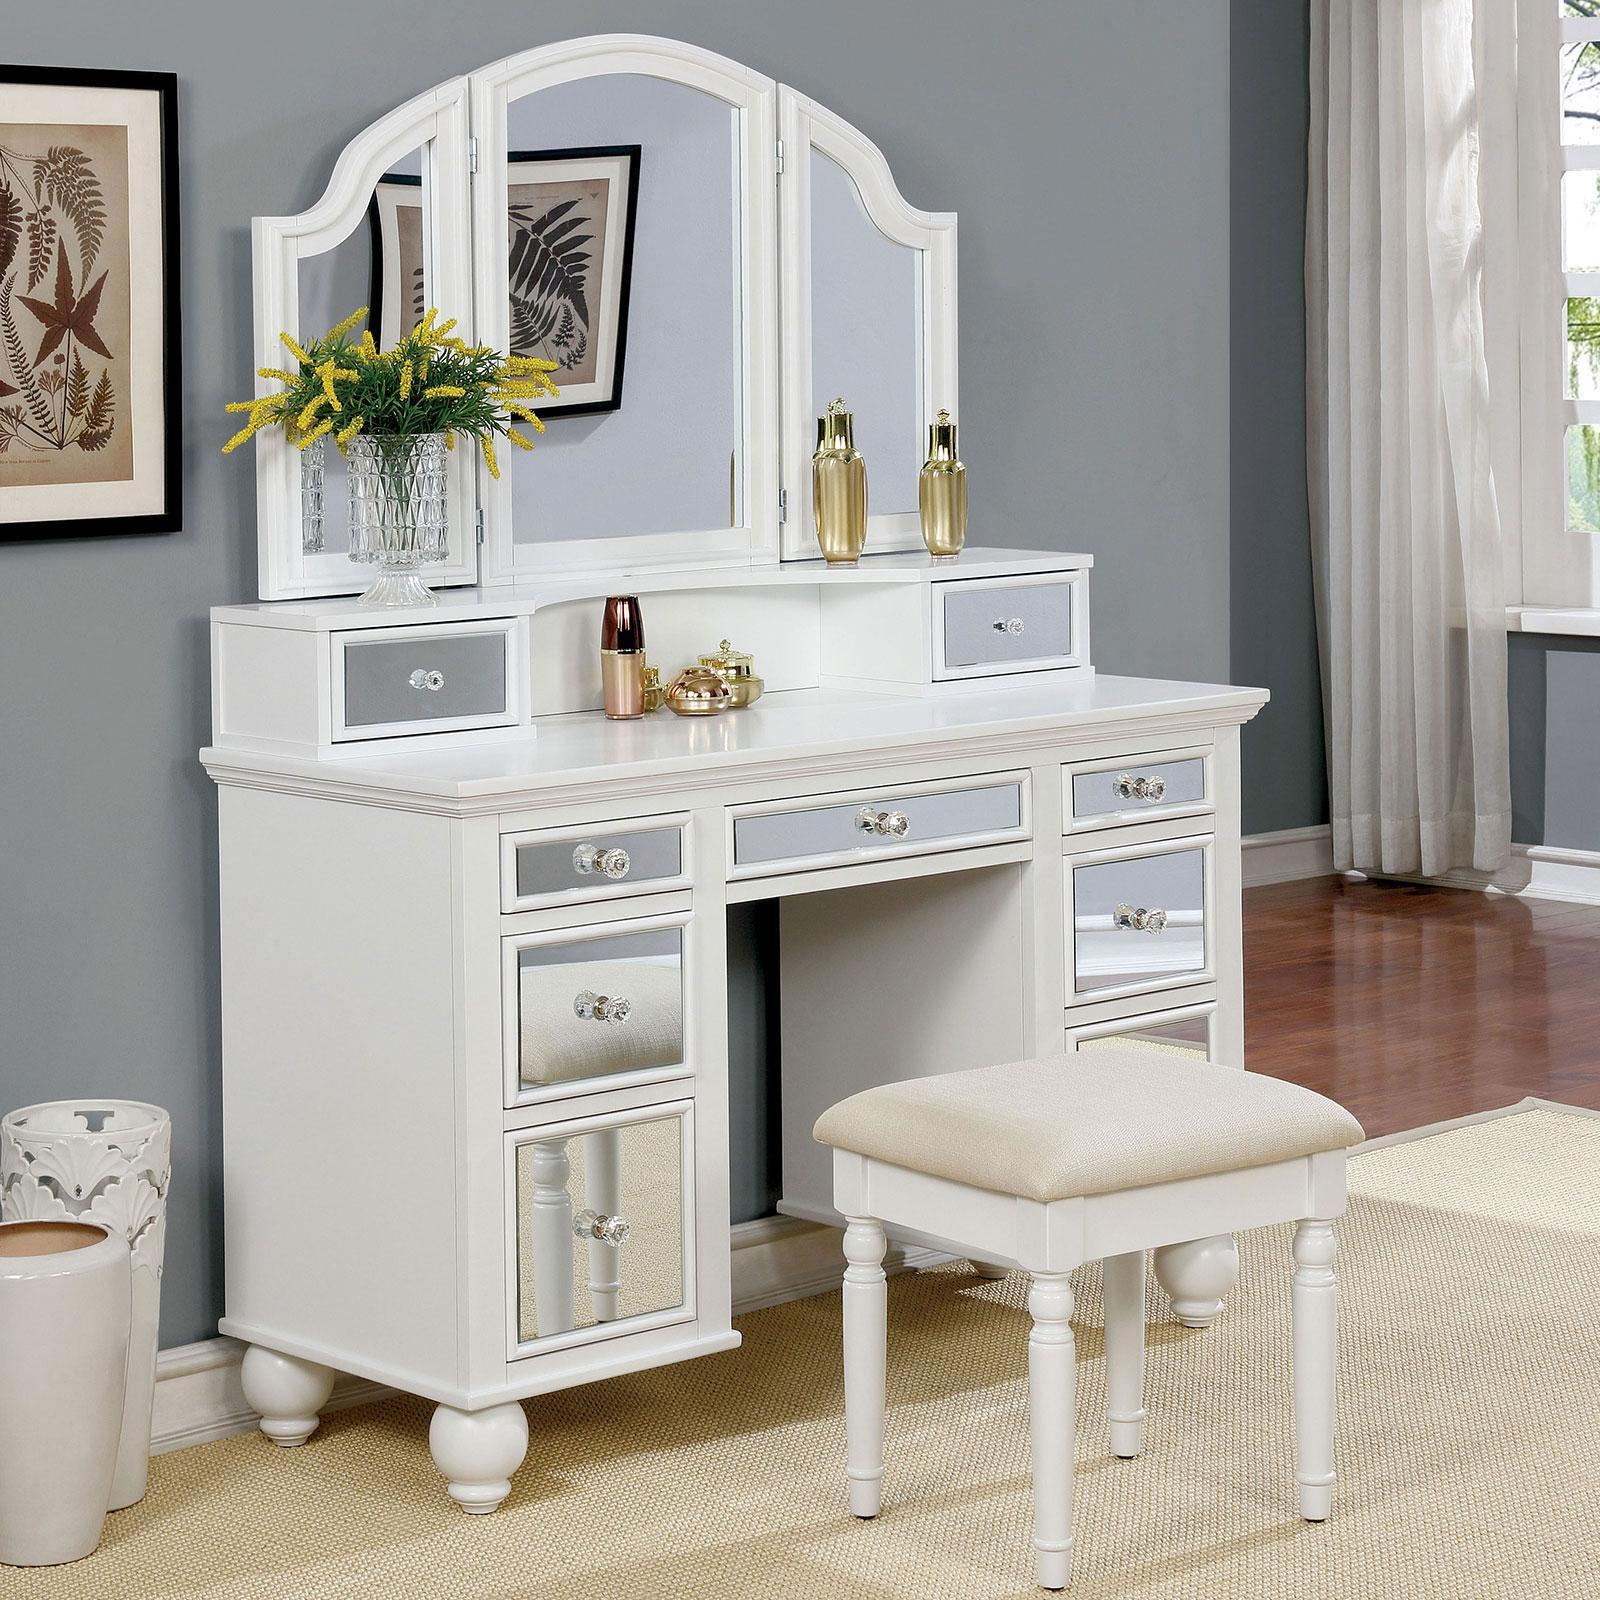 Contemporary Makeup Vanity TRACY CM-DK6162WH CM-DK6162WH in White Fabric